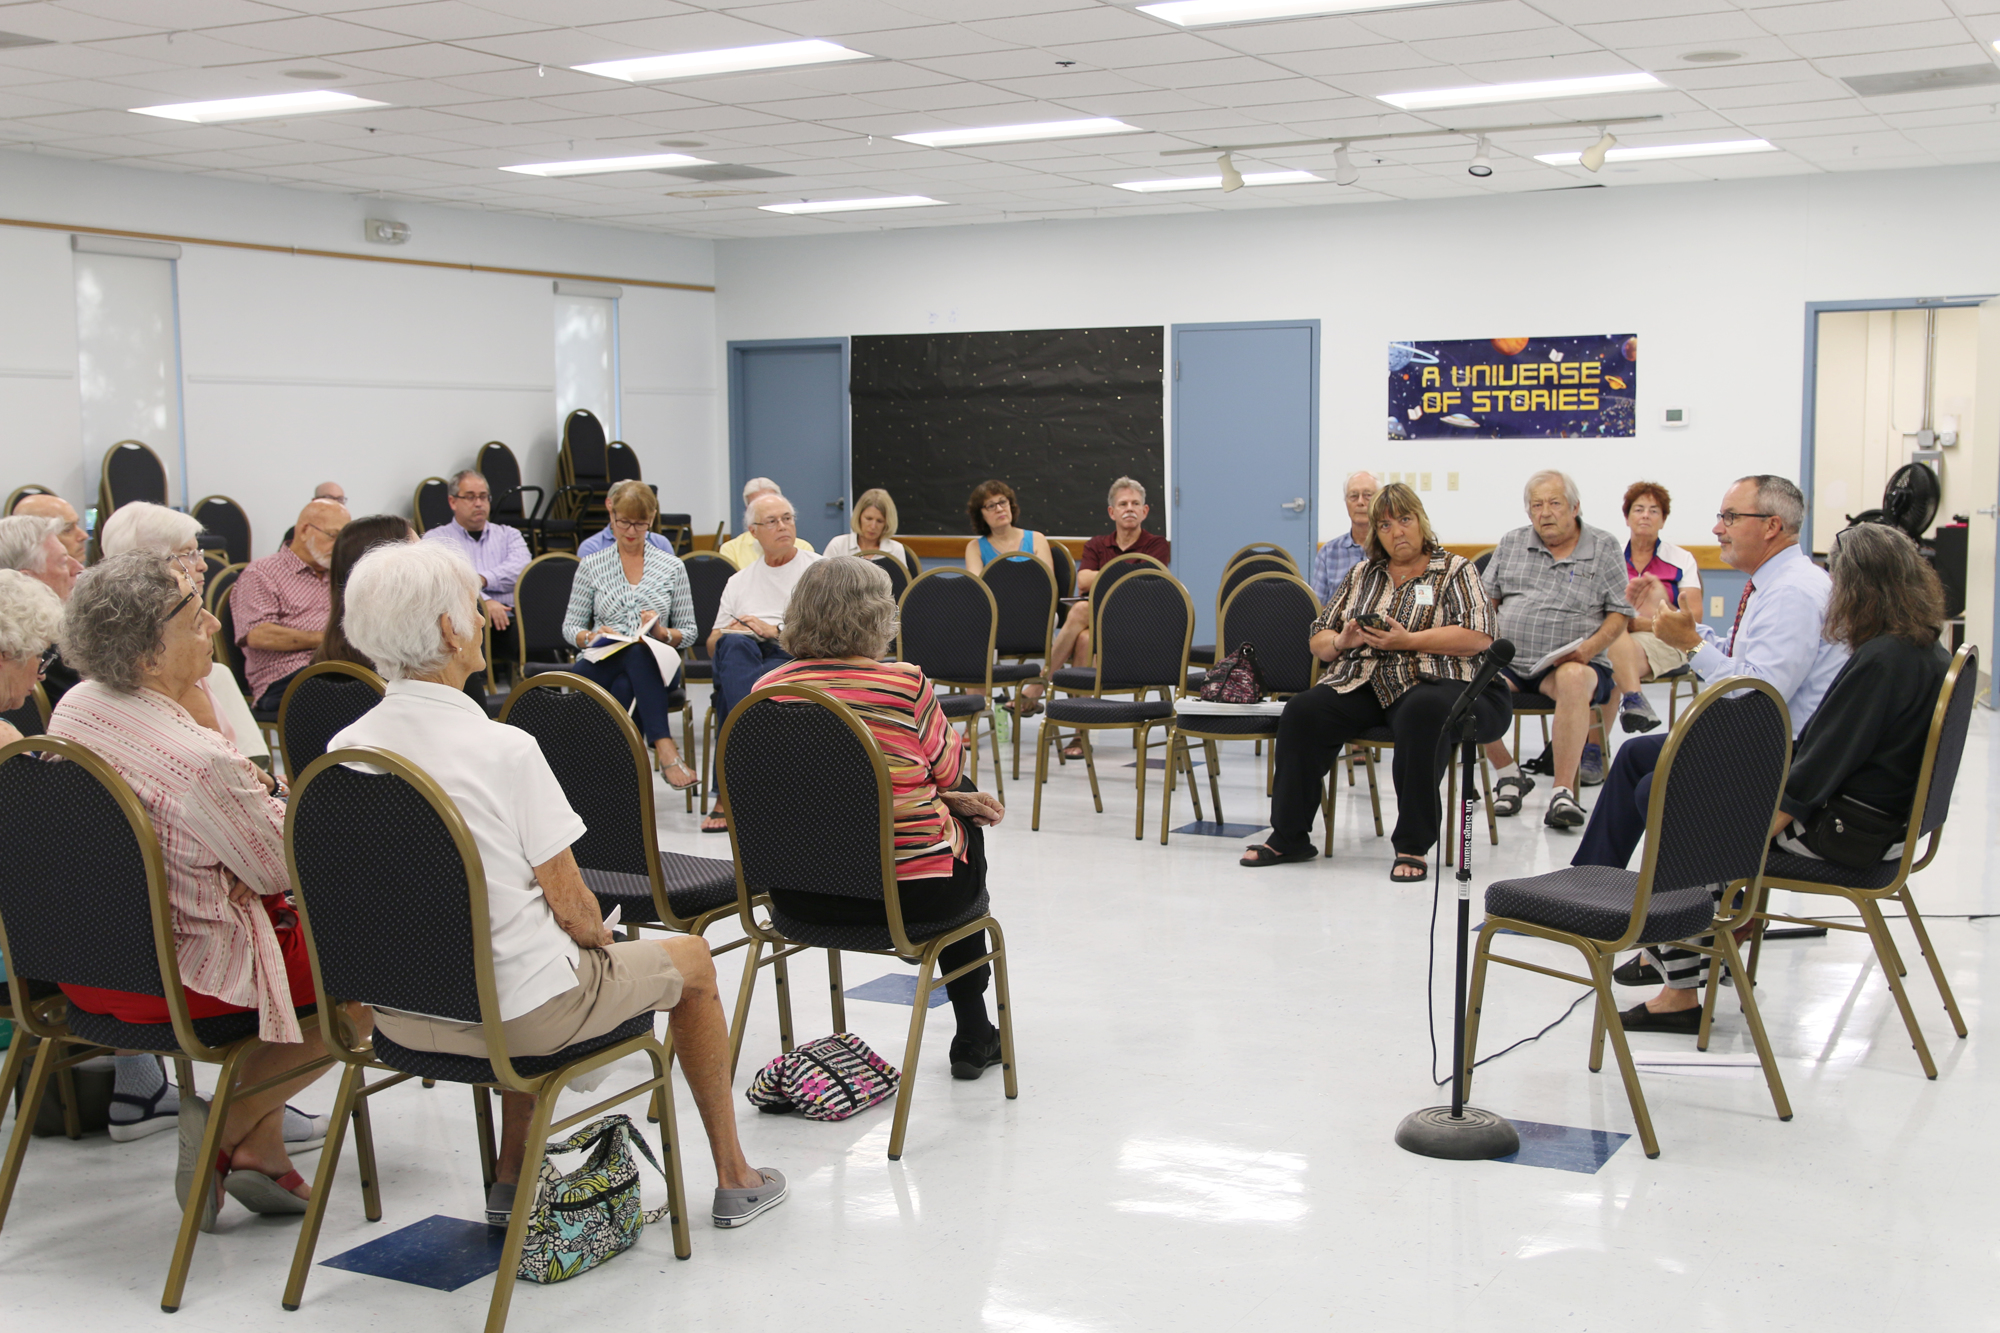 About 25 people attended the latest Civil Discourse town hall meeting on smart growth. Photo by Jarleene Almenas